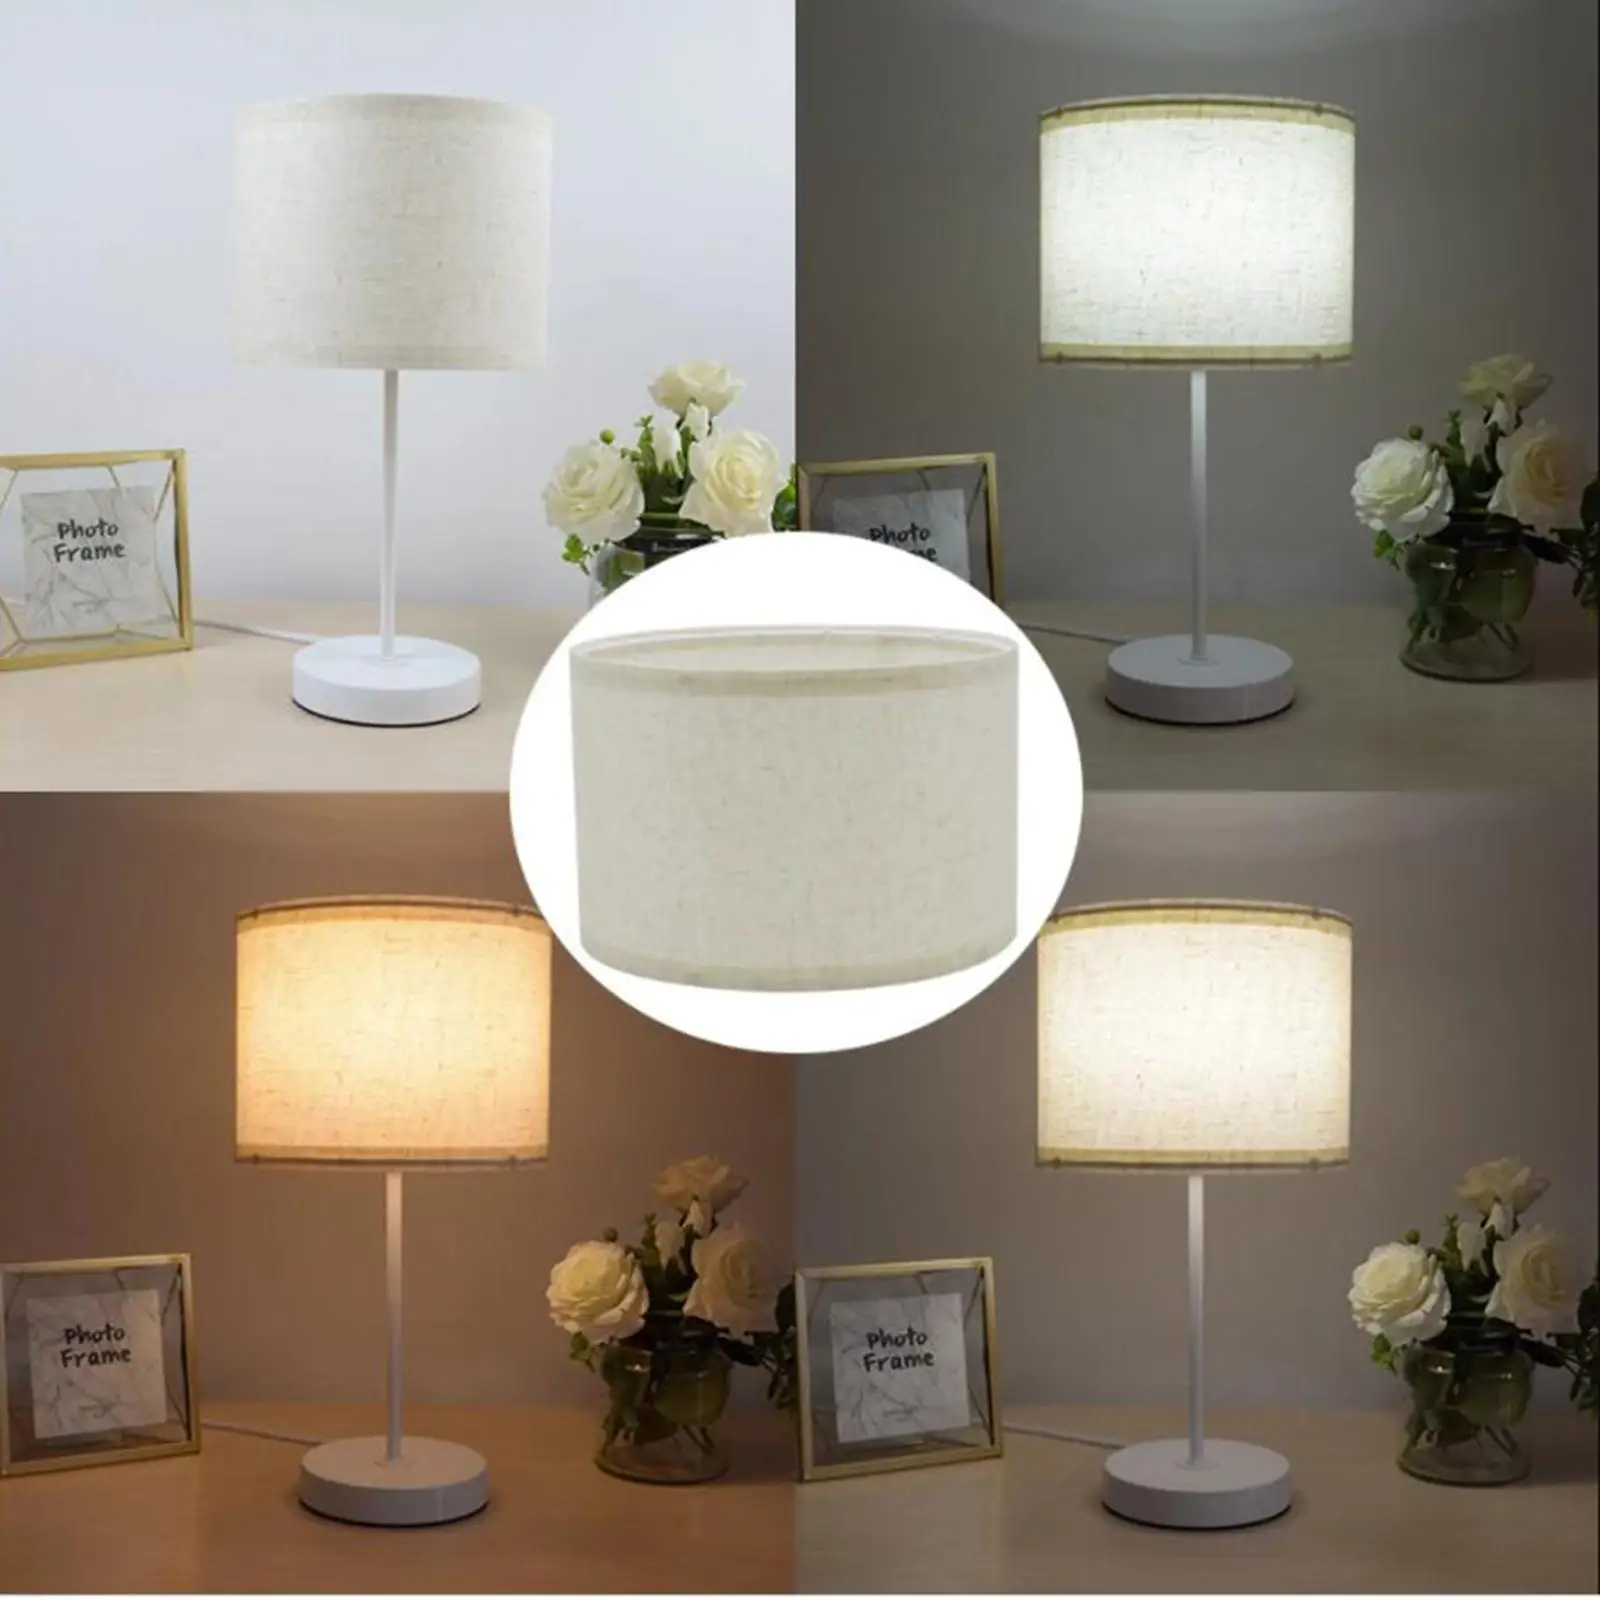 Drum Lamp Shade Home Decoration Lighting Fixture Classic for Table Lamp